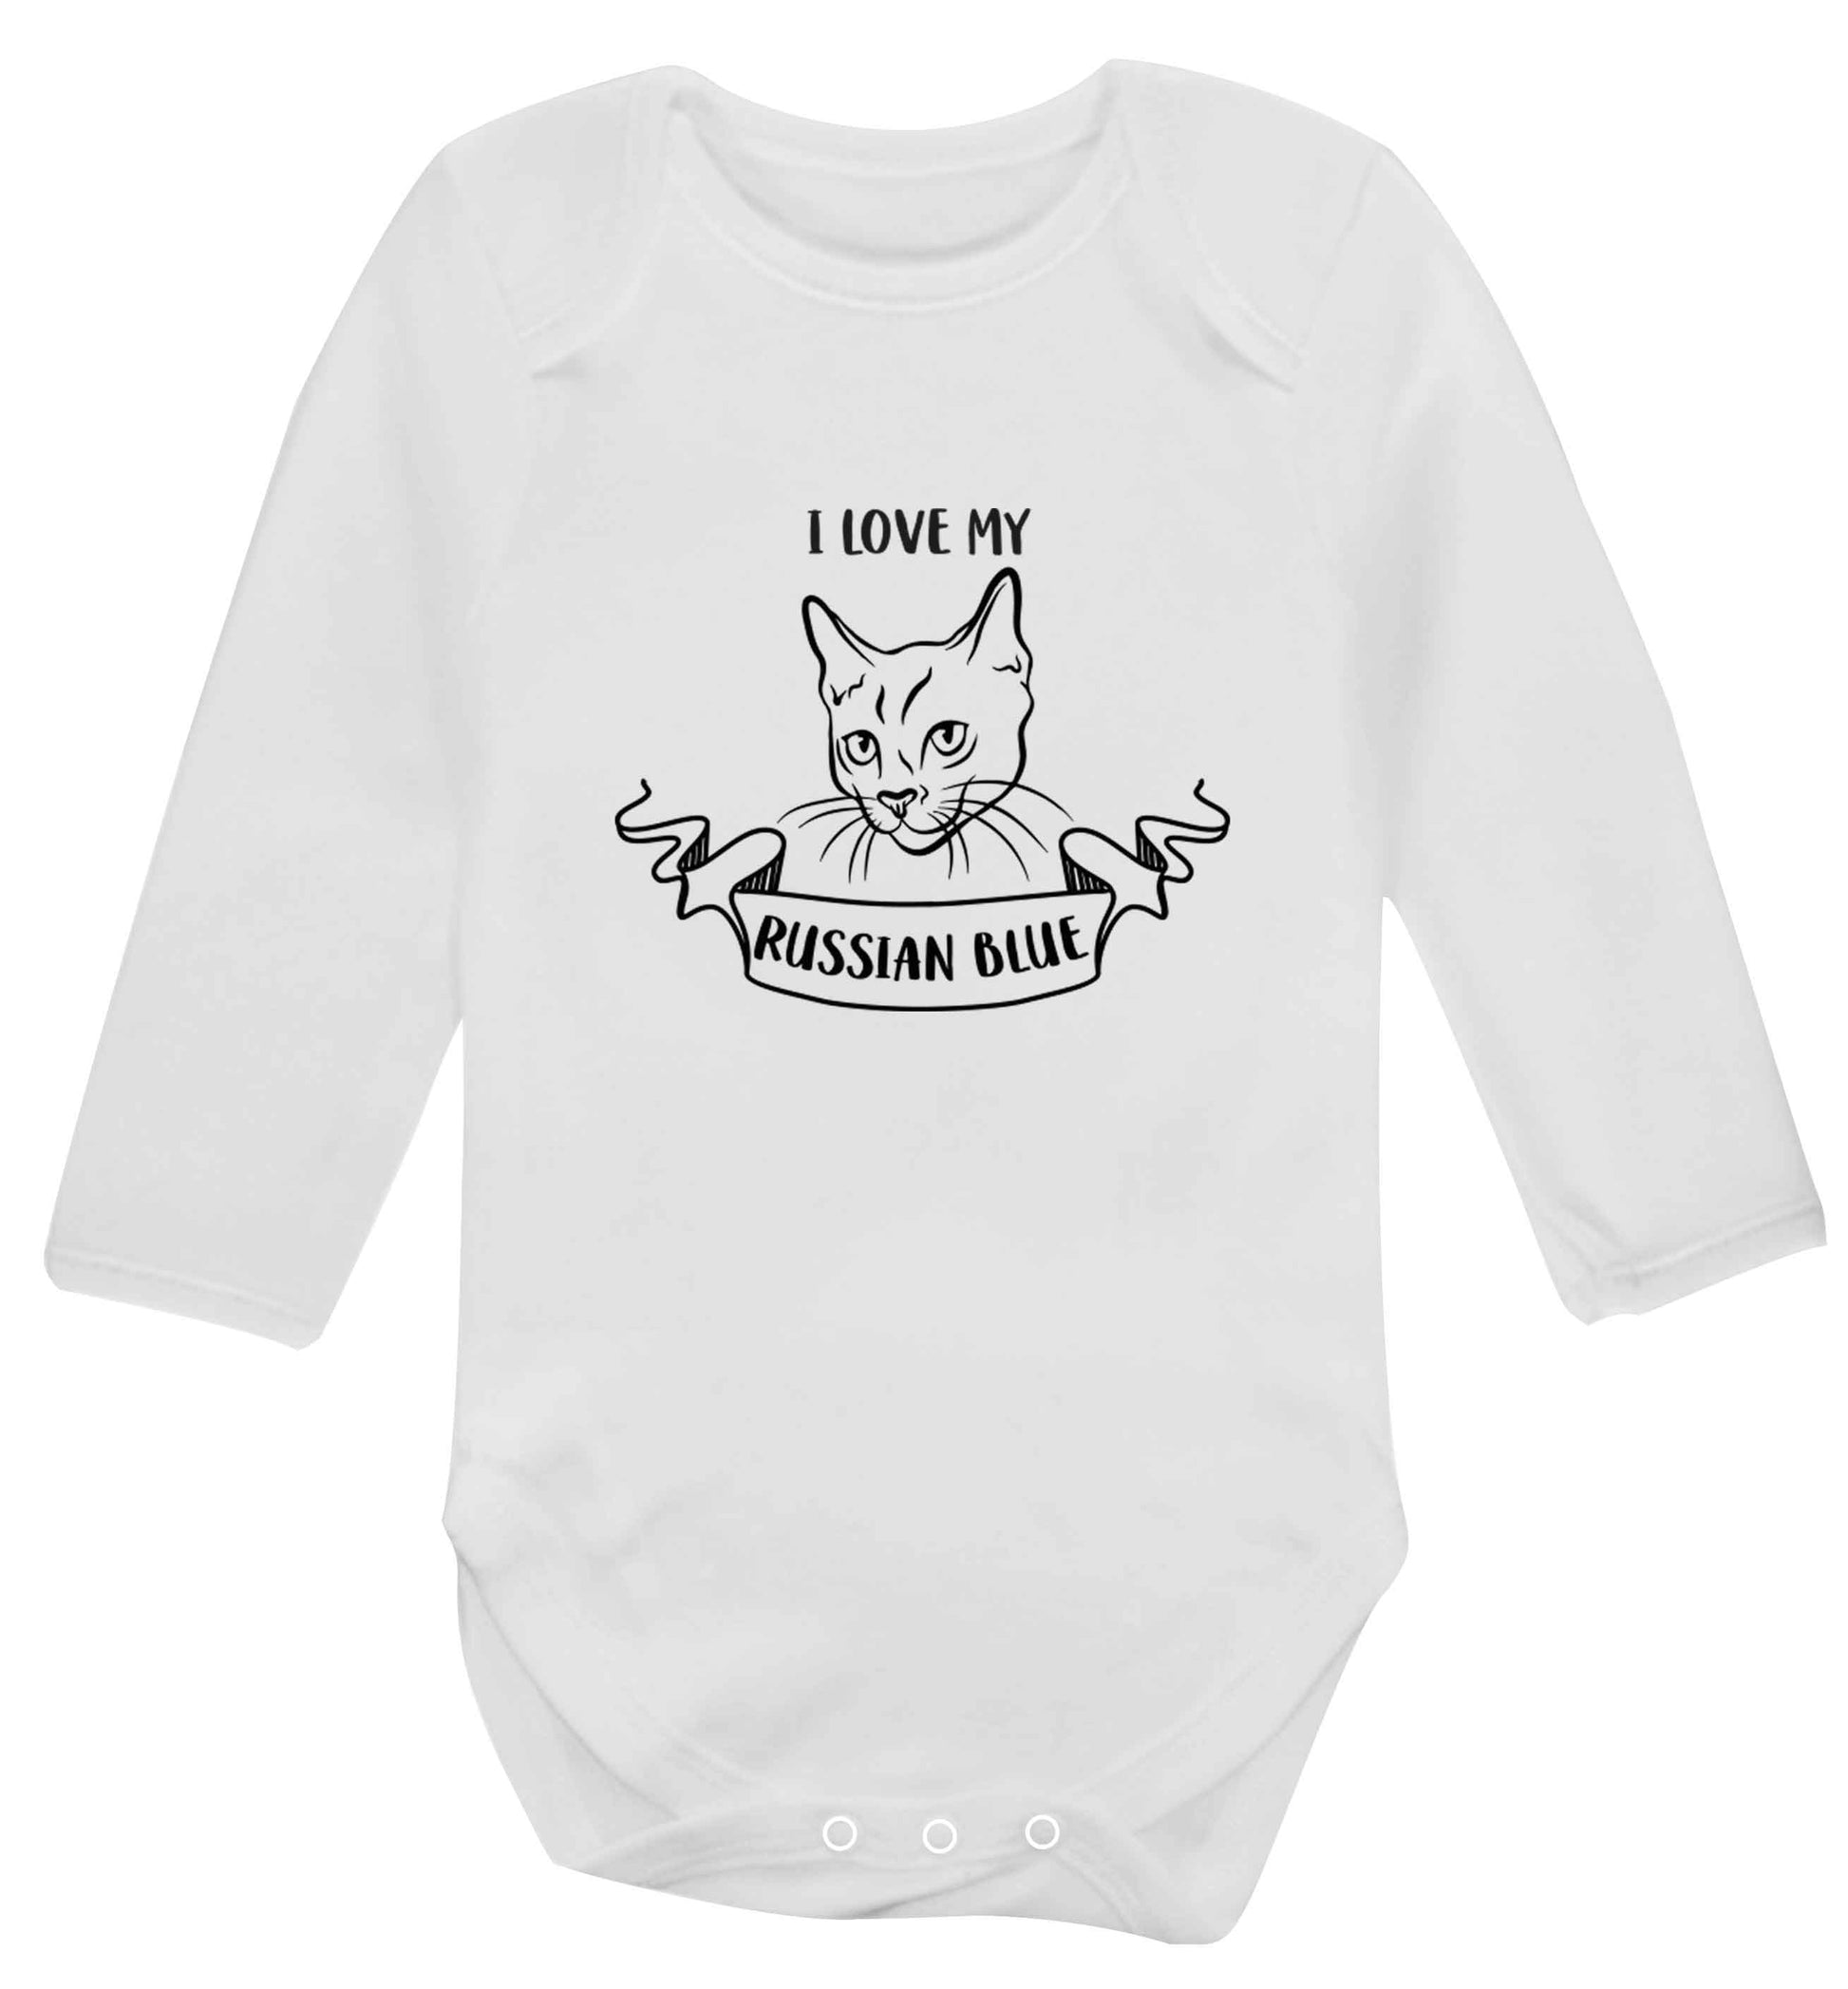 I love my russian blue baby vest long sleeved white 6-12 months